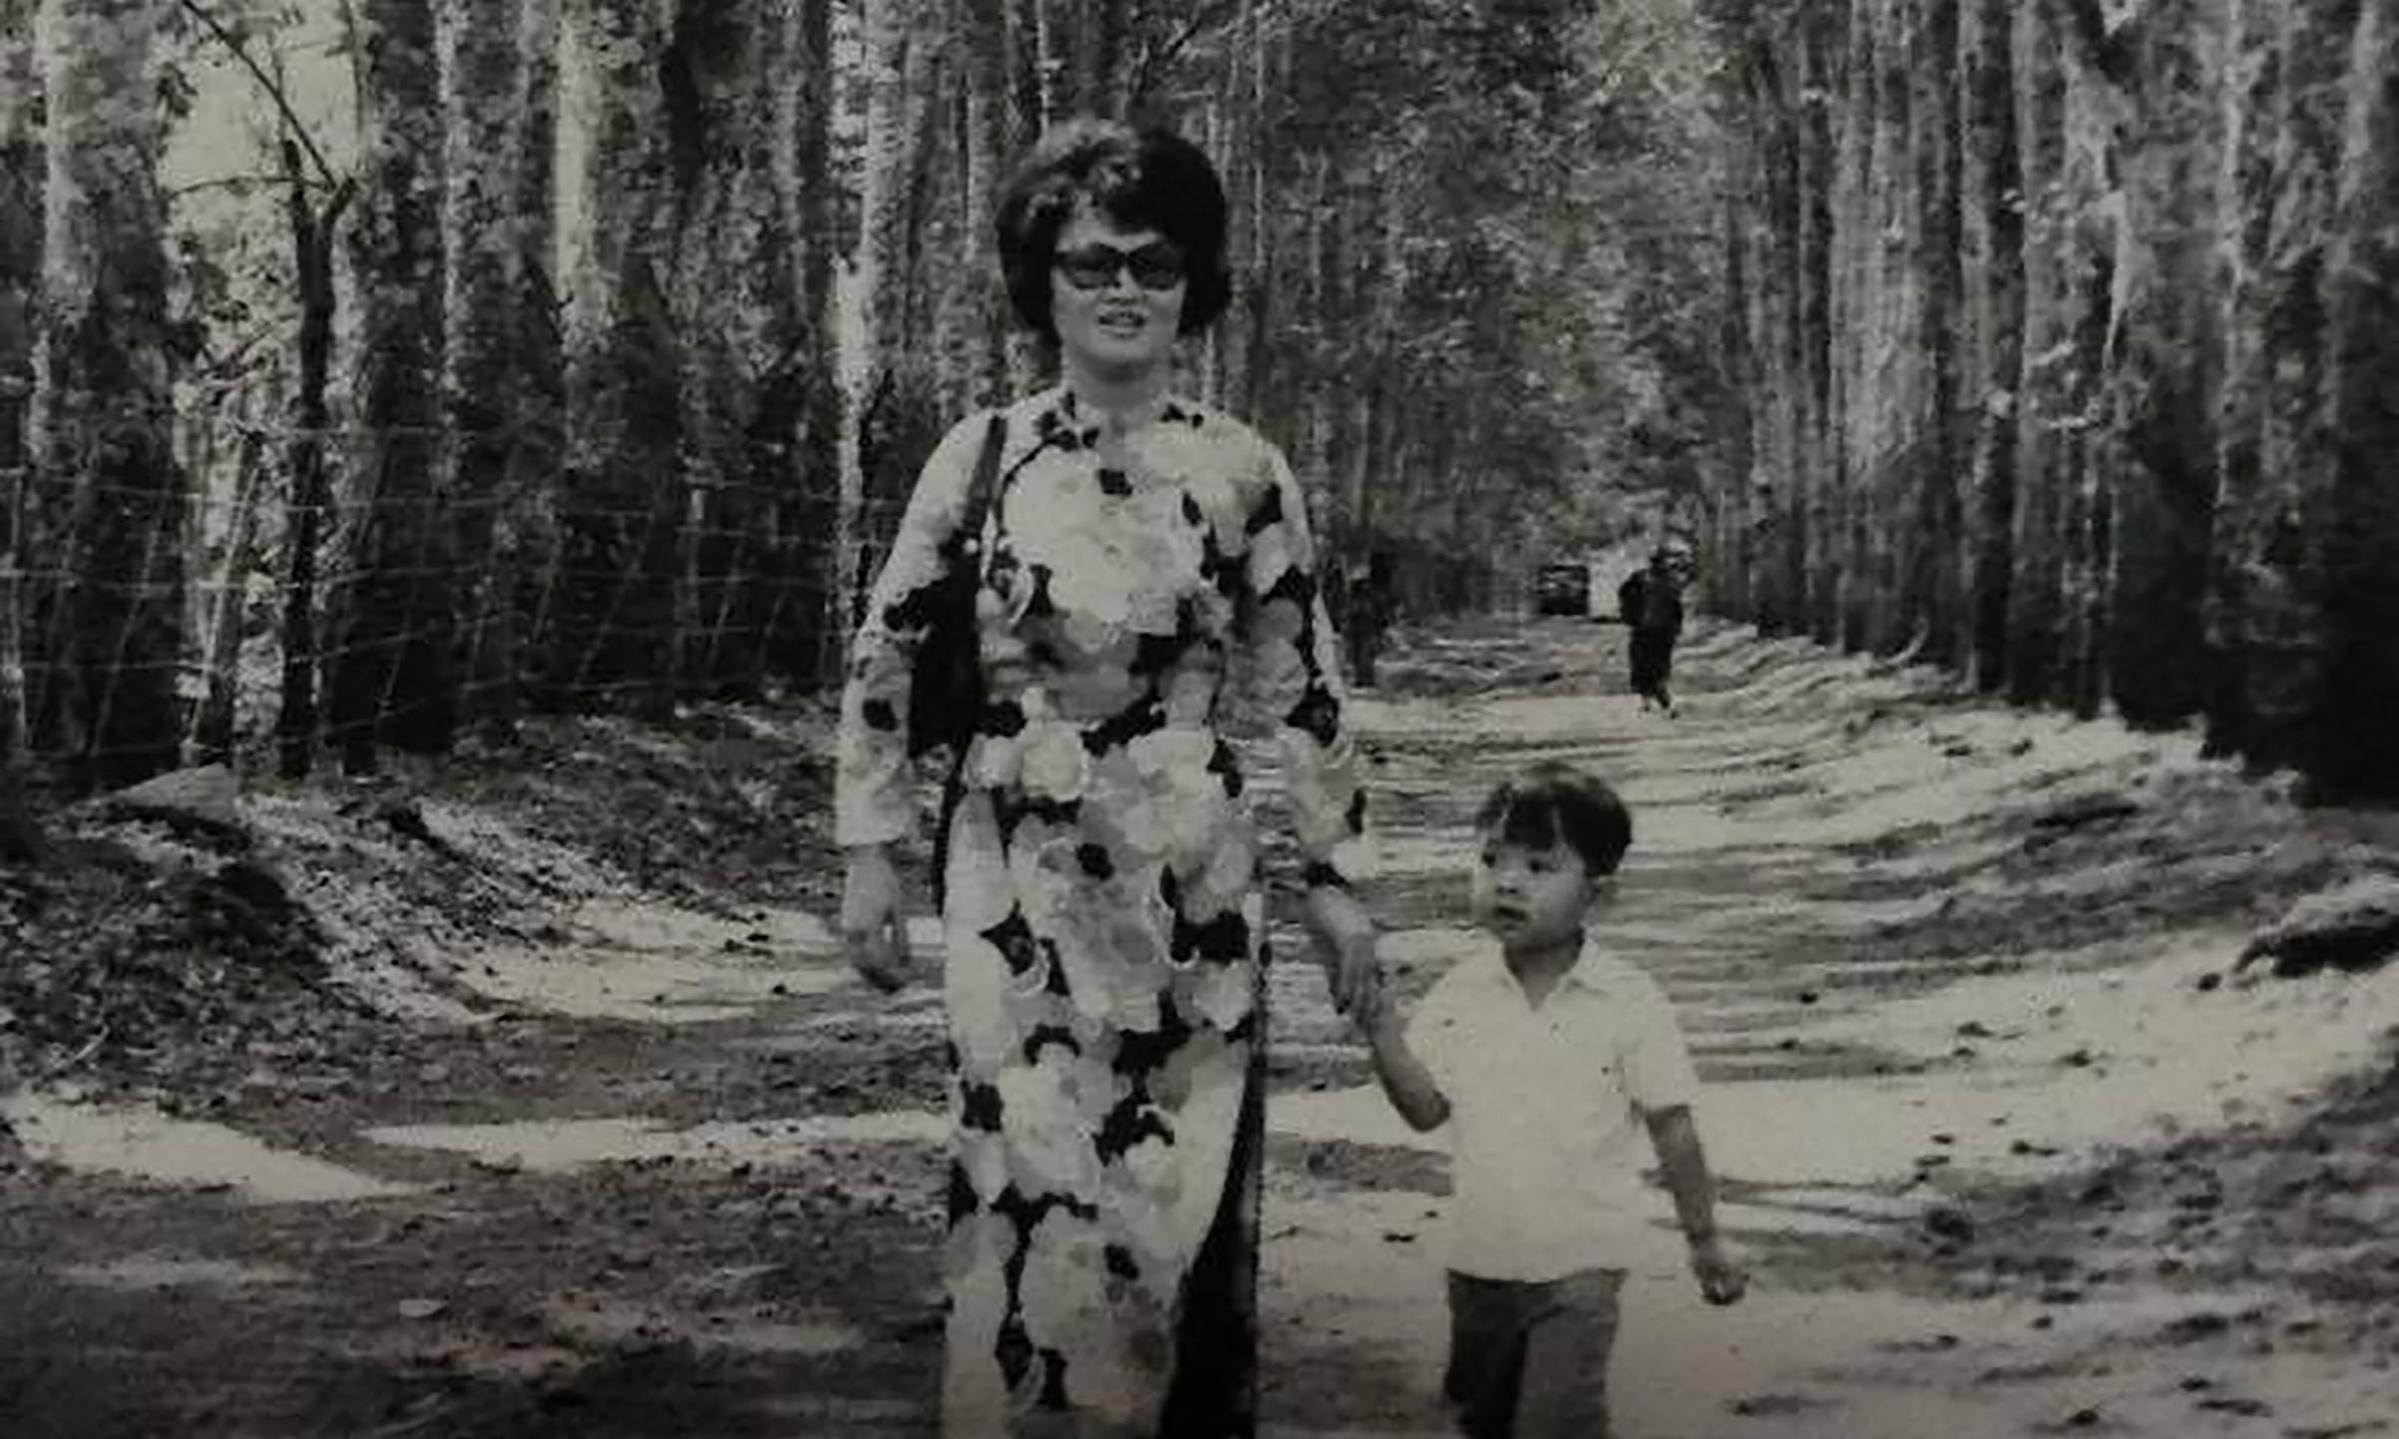 Nguyen with his mother in Vietnam, before they left for the U.S